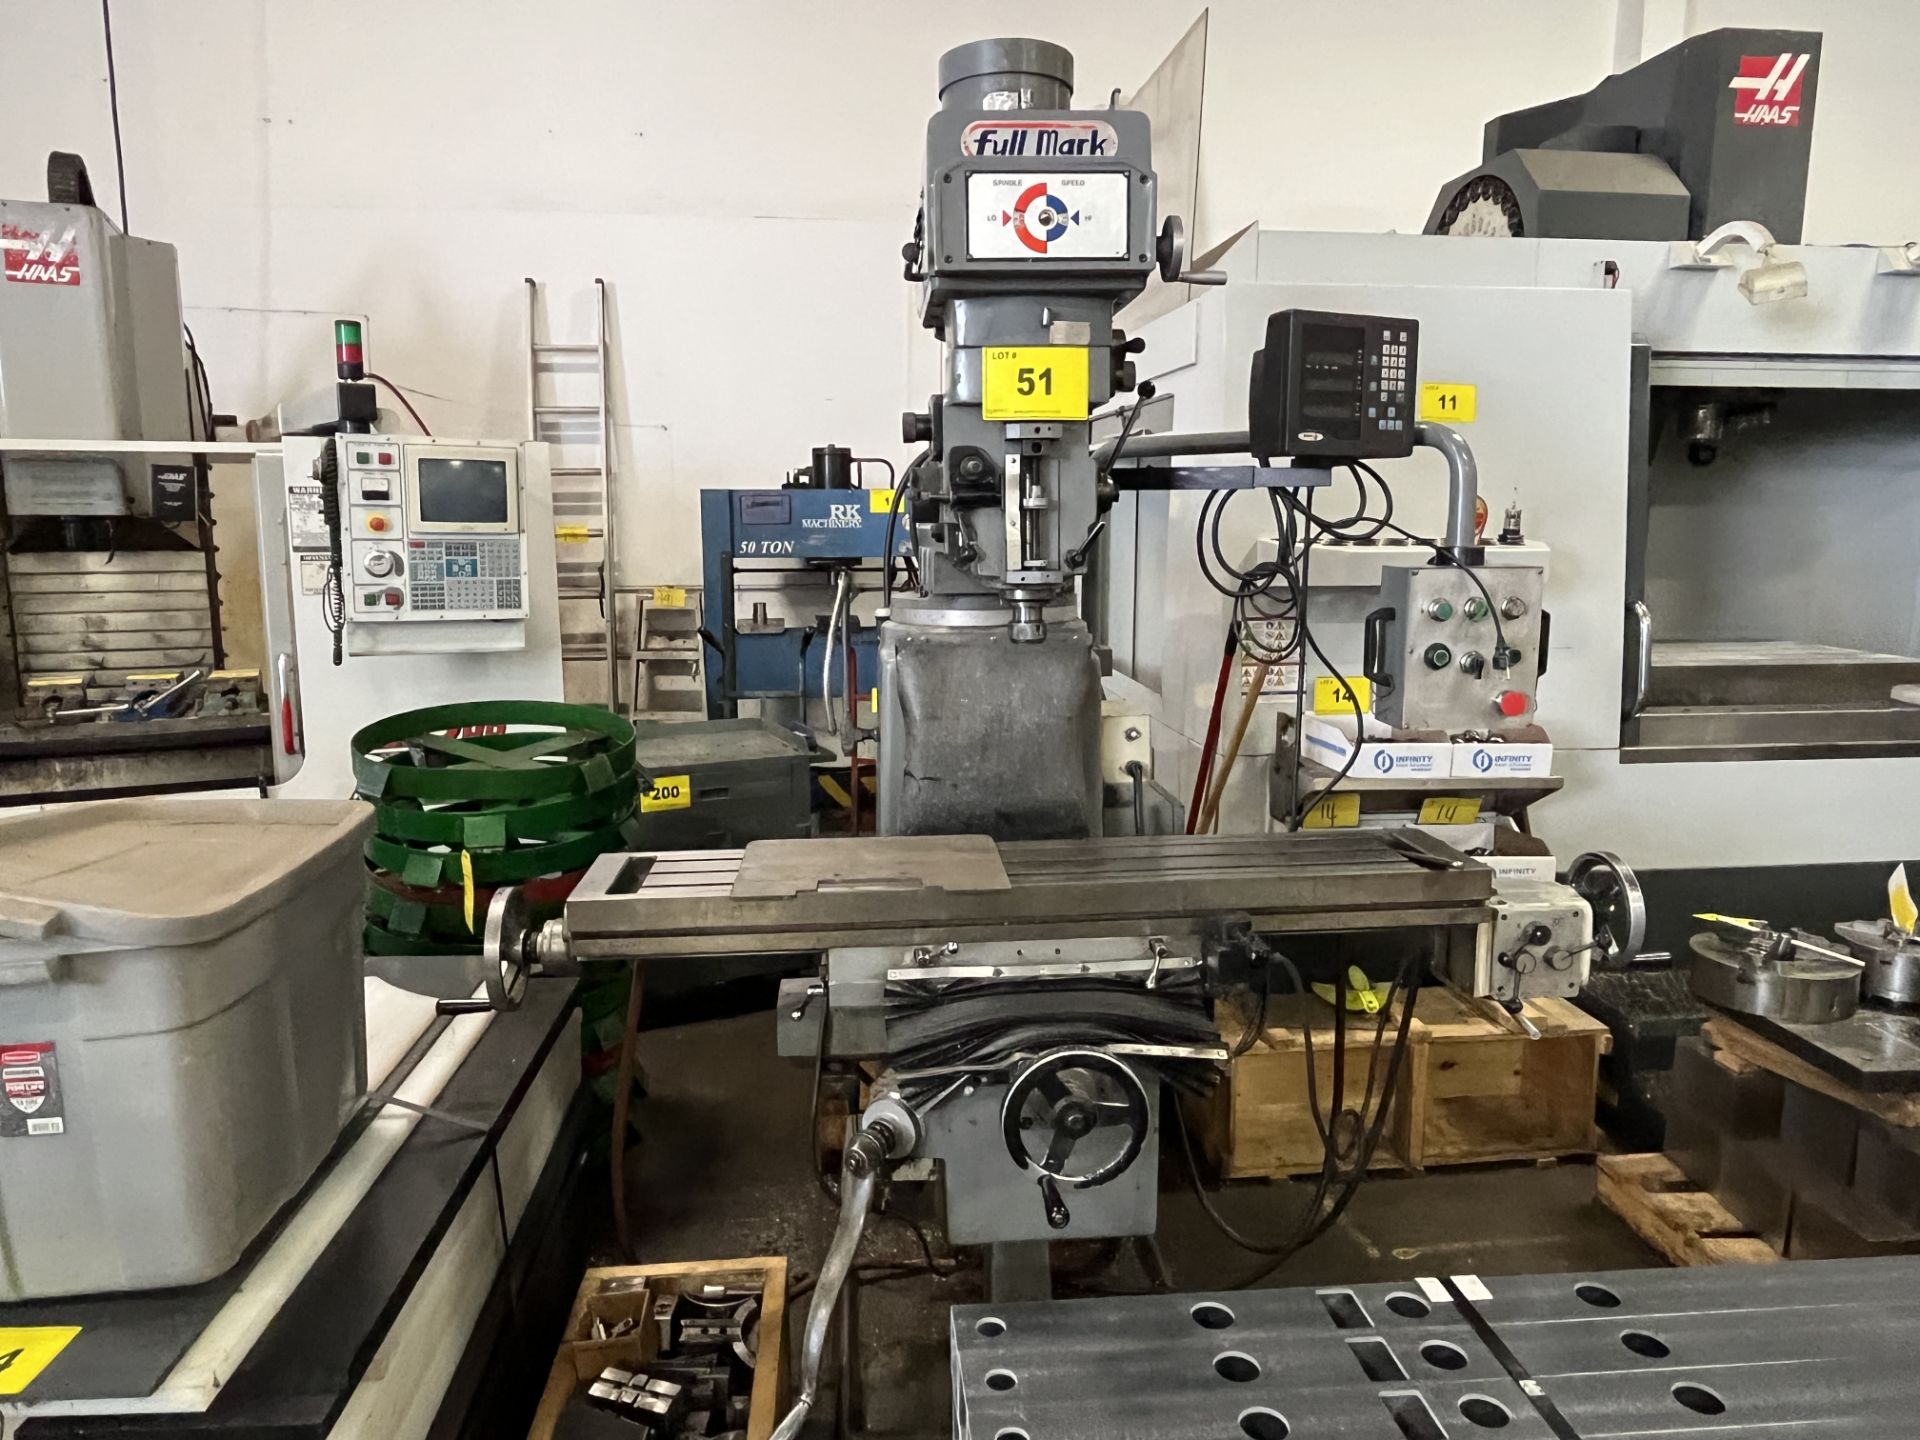 FULL MARK FM-18VS VERTICAL MILLING MACHINE, FAGOR 3-AXIS DRO, 40 TAPER, POWER X & Z FEEDS, 10” X 54” - Image 10 of 10